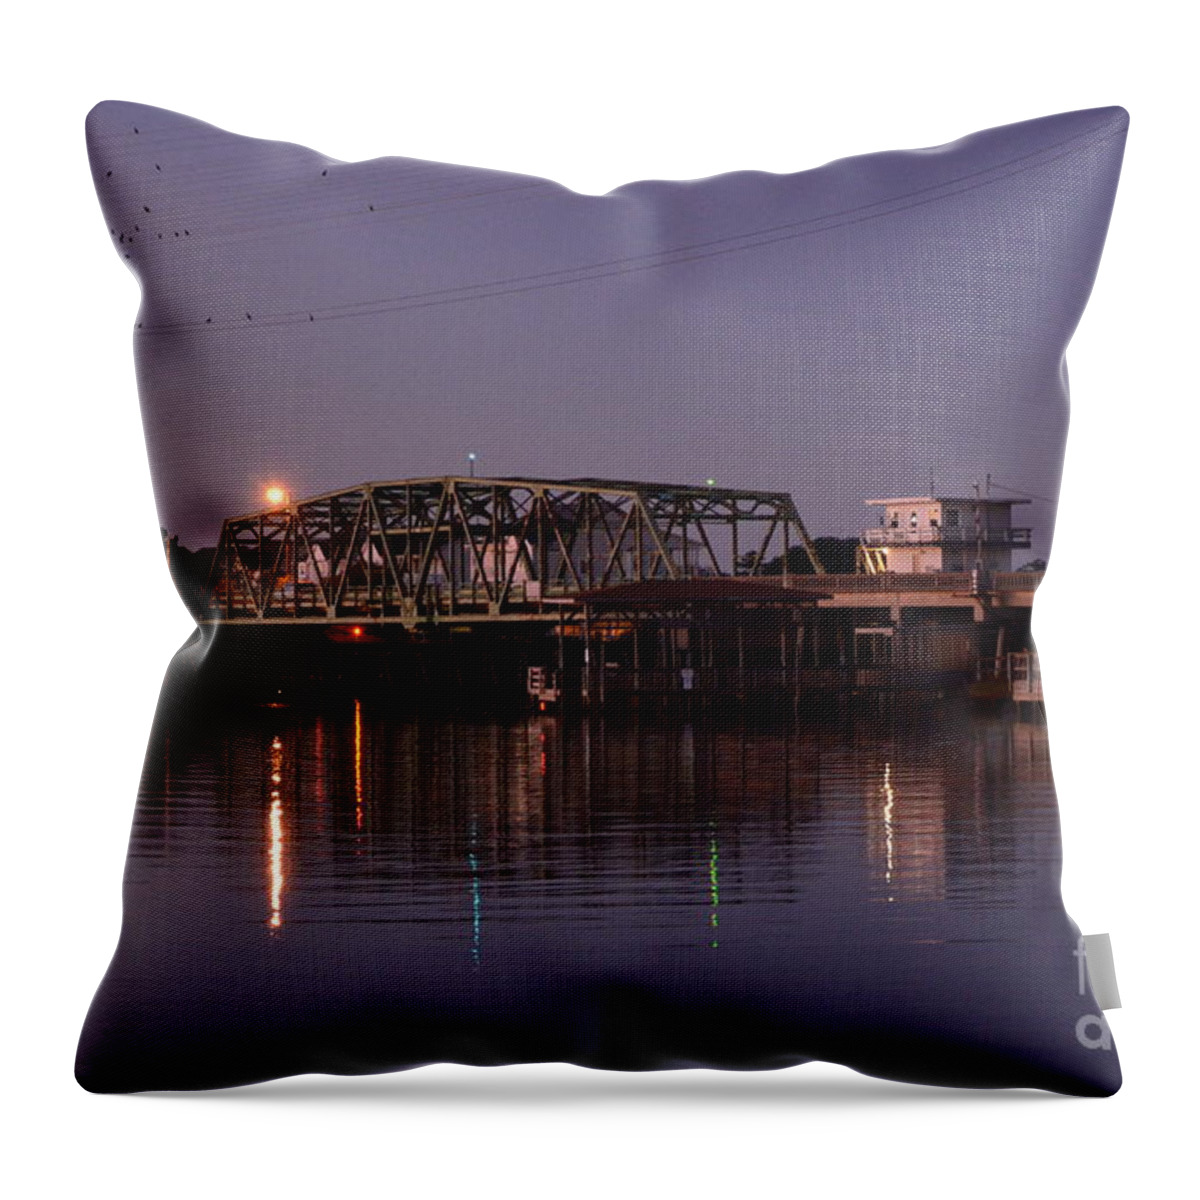 Surf City Throw Pillow featuring the photograph Surf City Bridge Night Time Reflections by Bob Sample